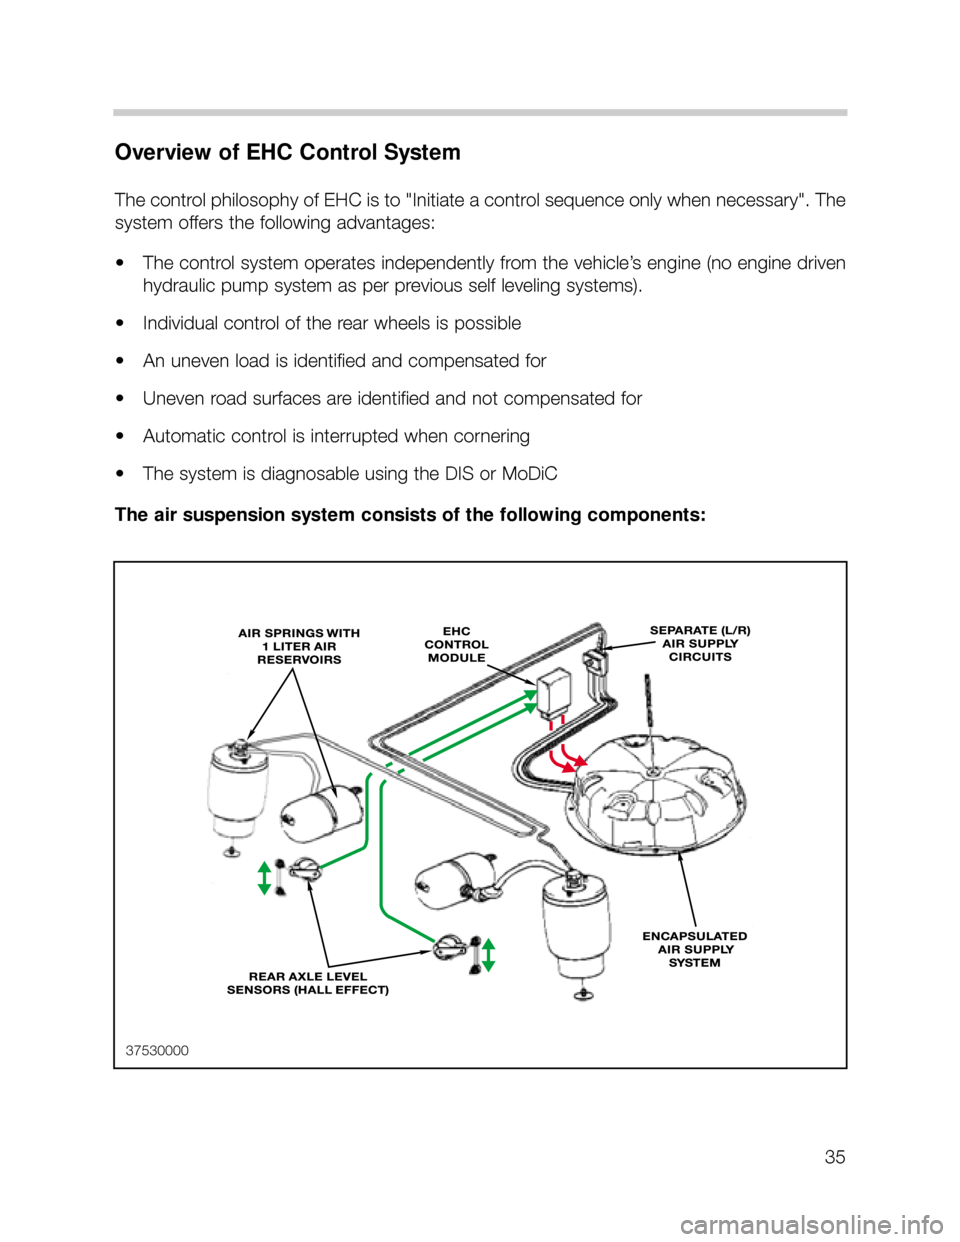 BMW X5 2003 E53 Owners Guide 35
Overview of EHC Control System
The control philosophy of EHC is to "Initiate a control sequence only when necessary". The
system offers the following advantages:
• The control system operates ind